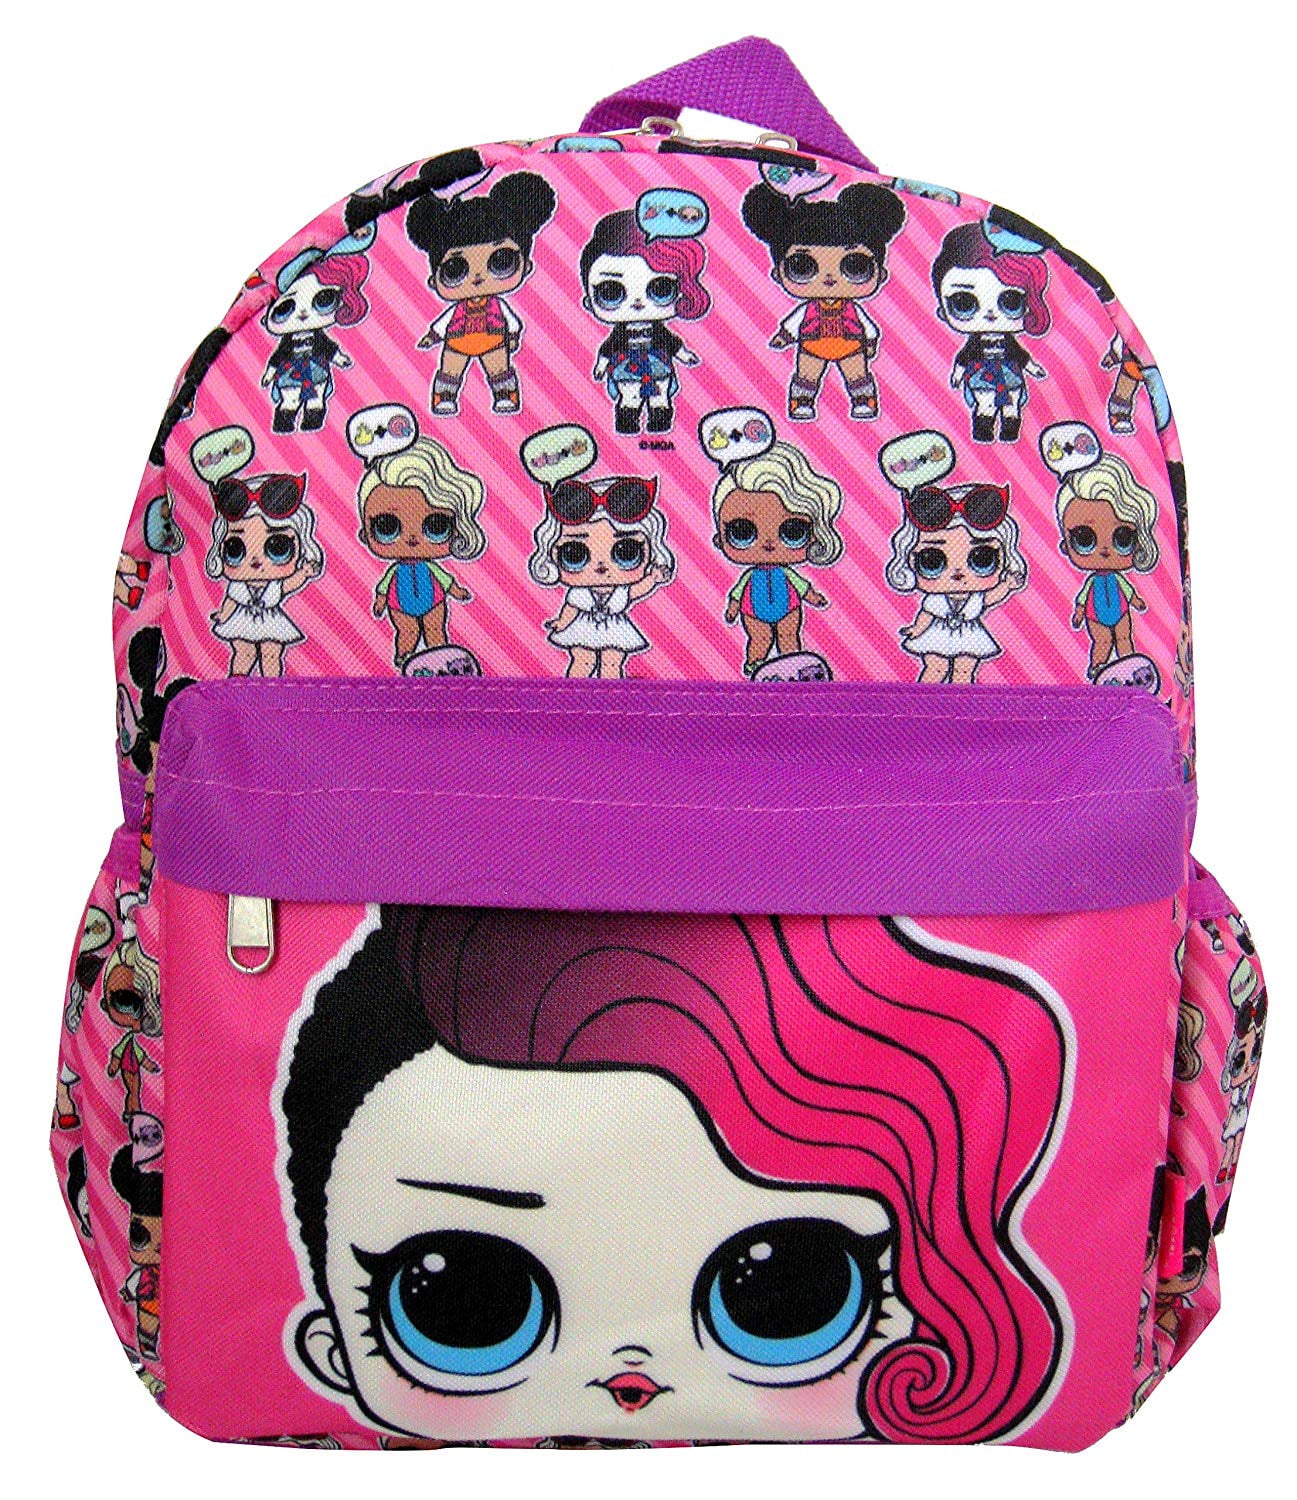 Small Backpack - LOL Surprise - Rocker From Glee Club New 002886-2 ...